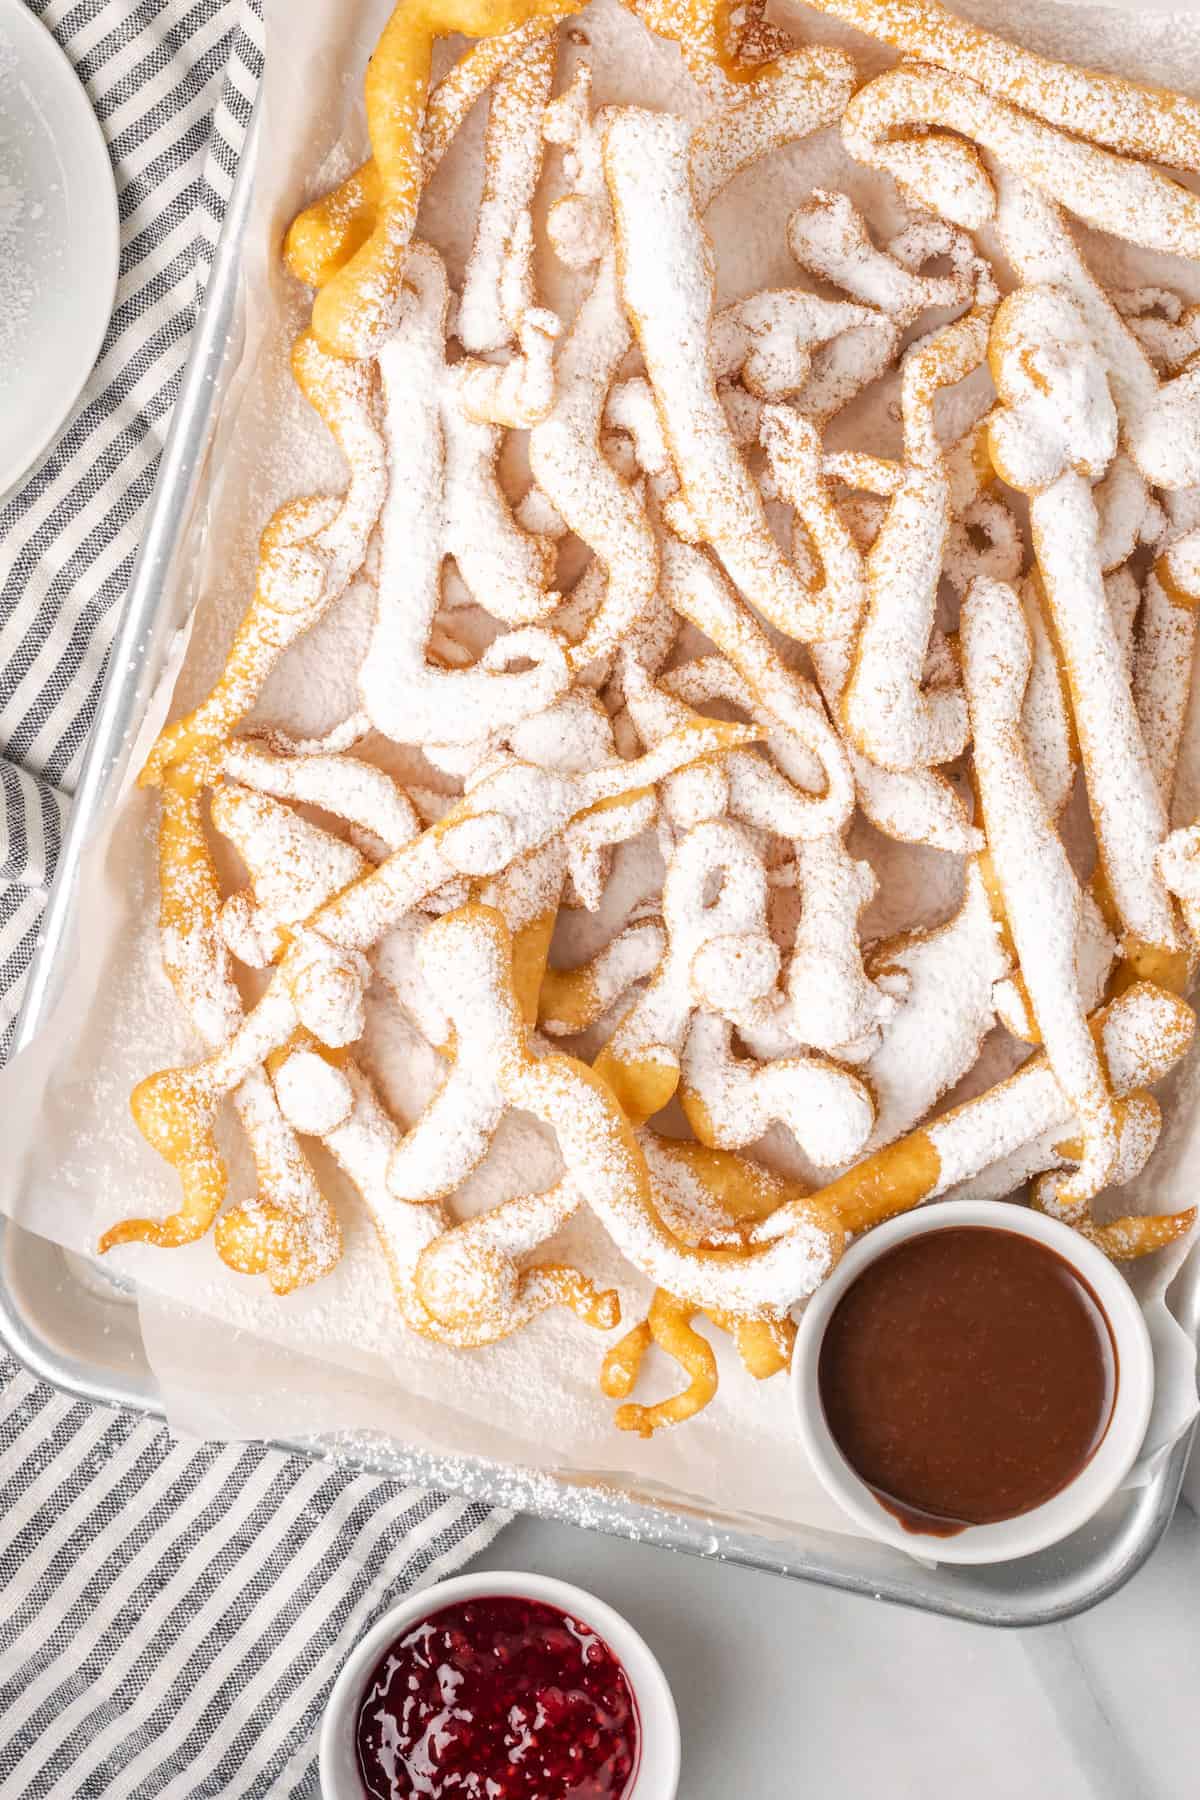 Curly fried funnel cake fries on a tray.